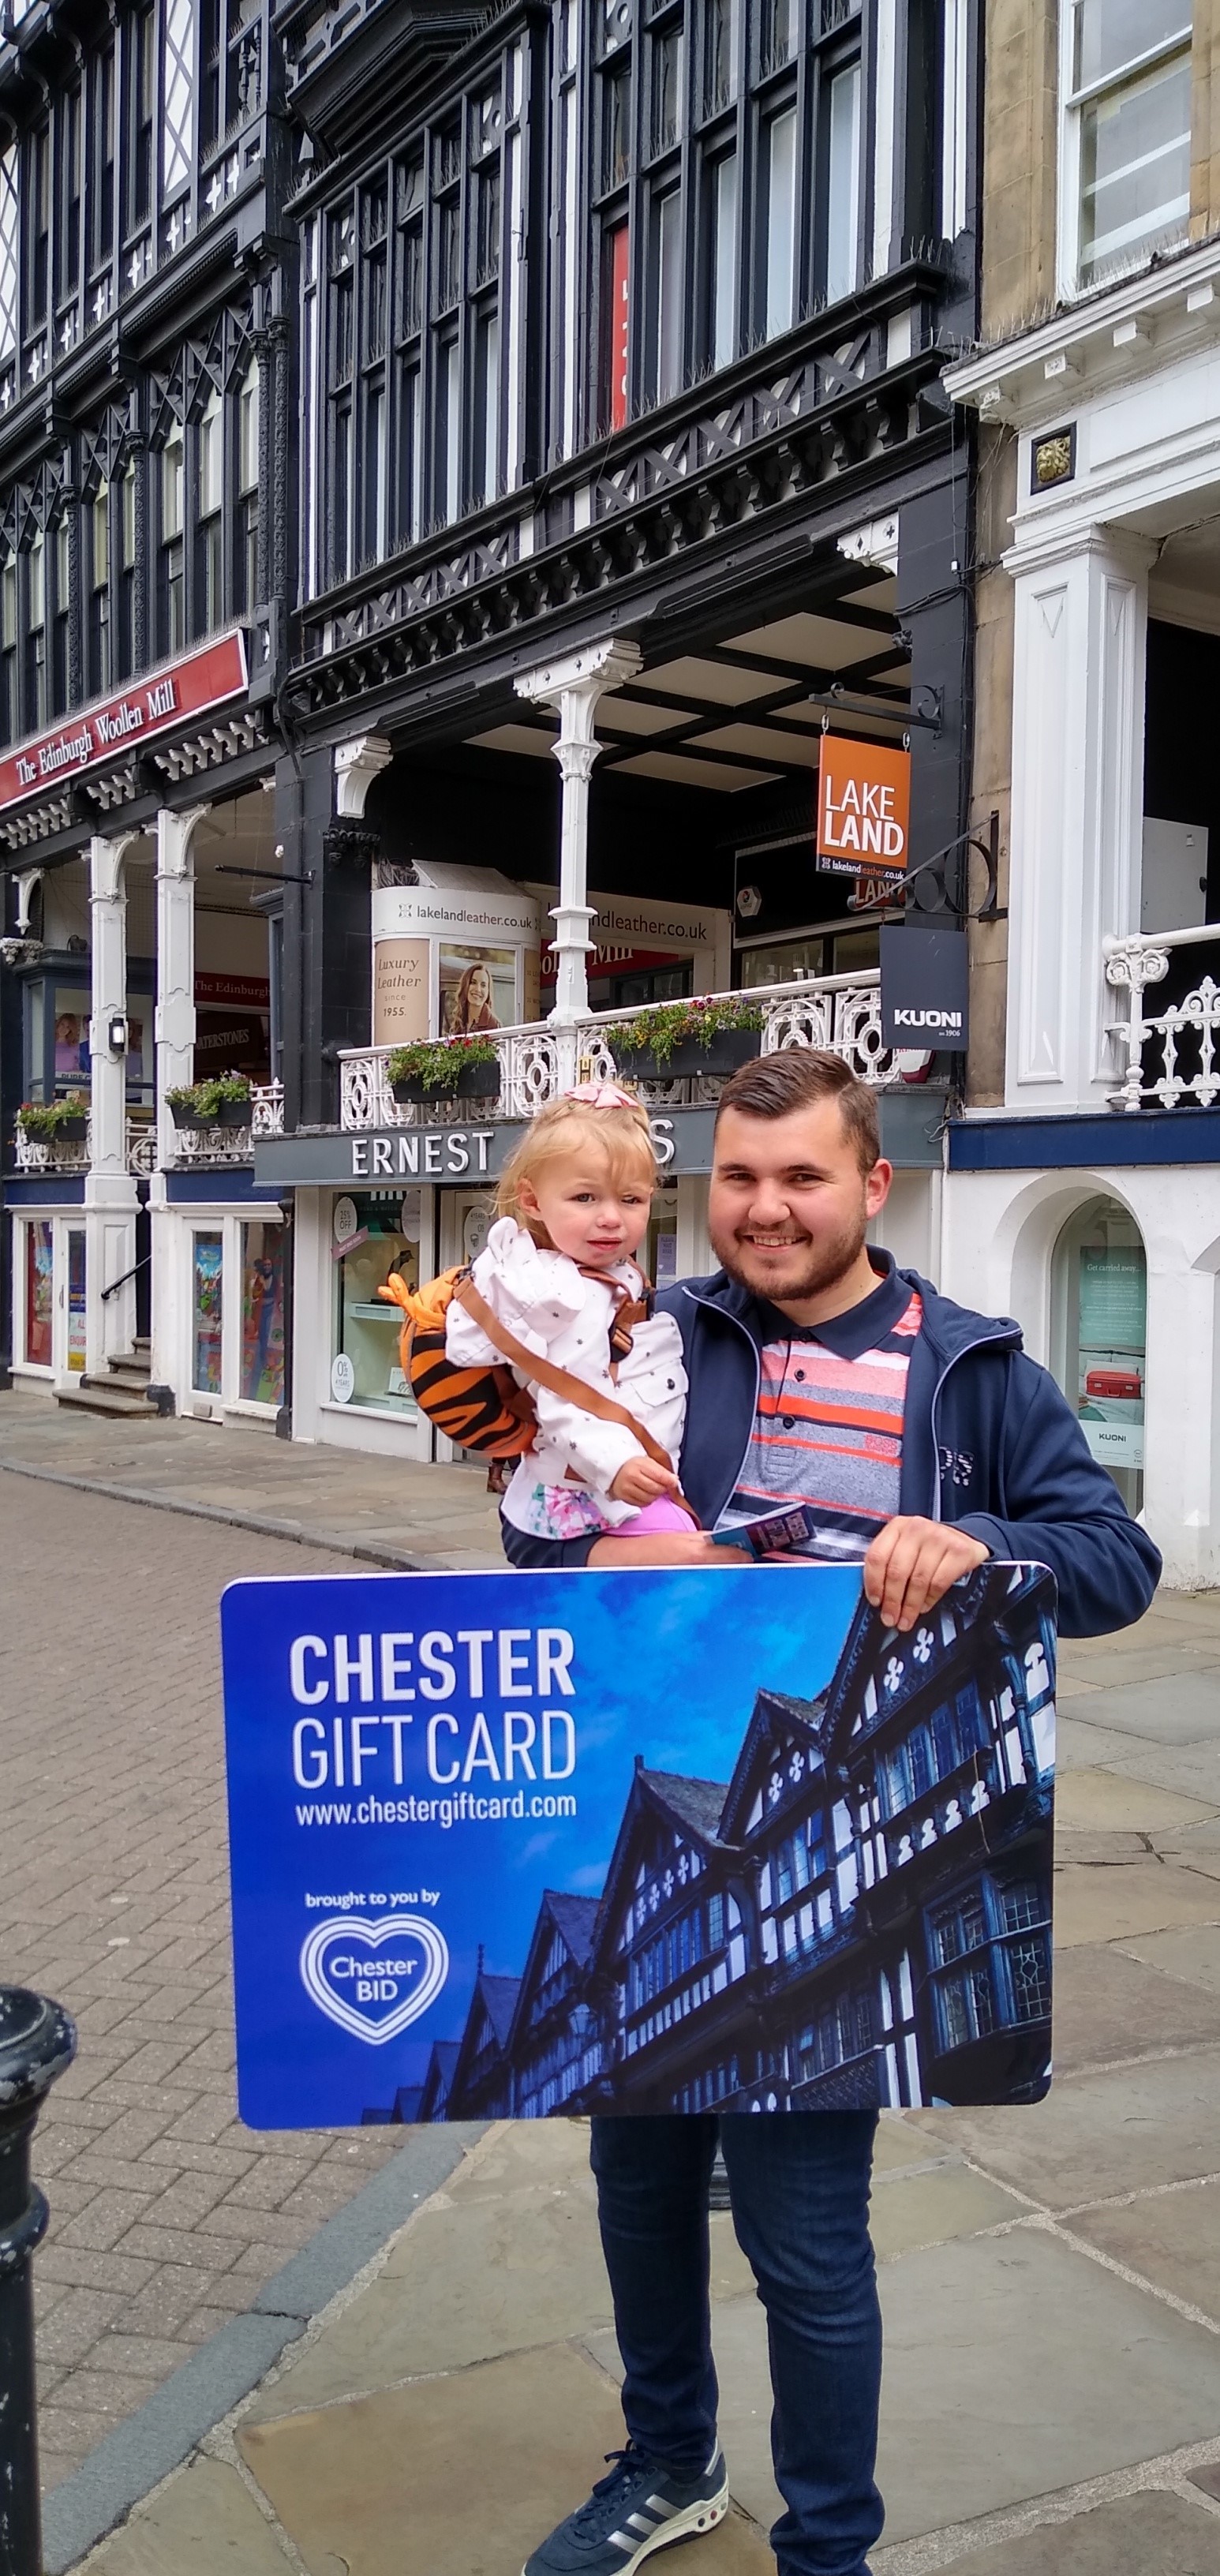 Ben Wynne with his daughter Poppy promoting the Chester Gift Card.